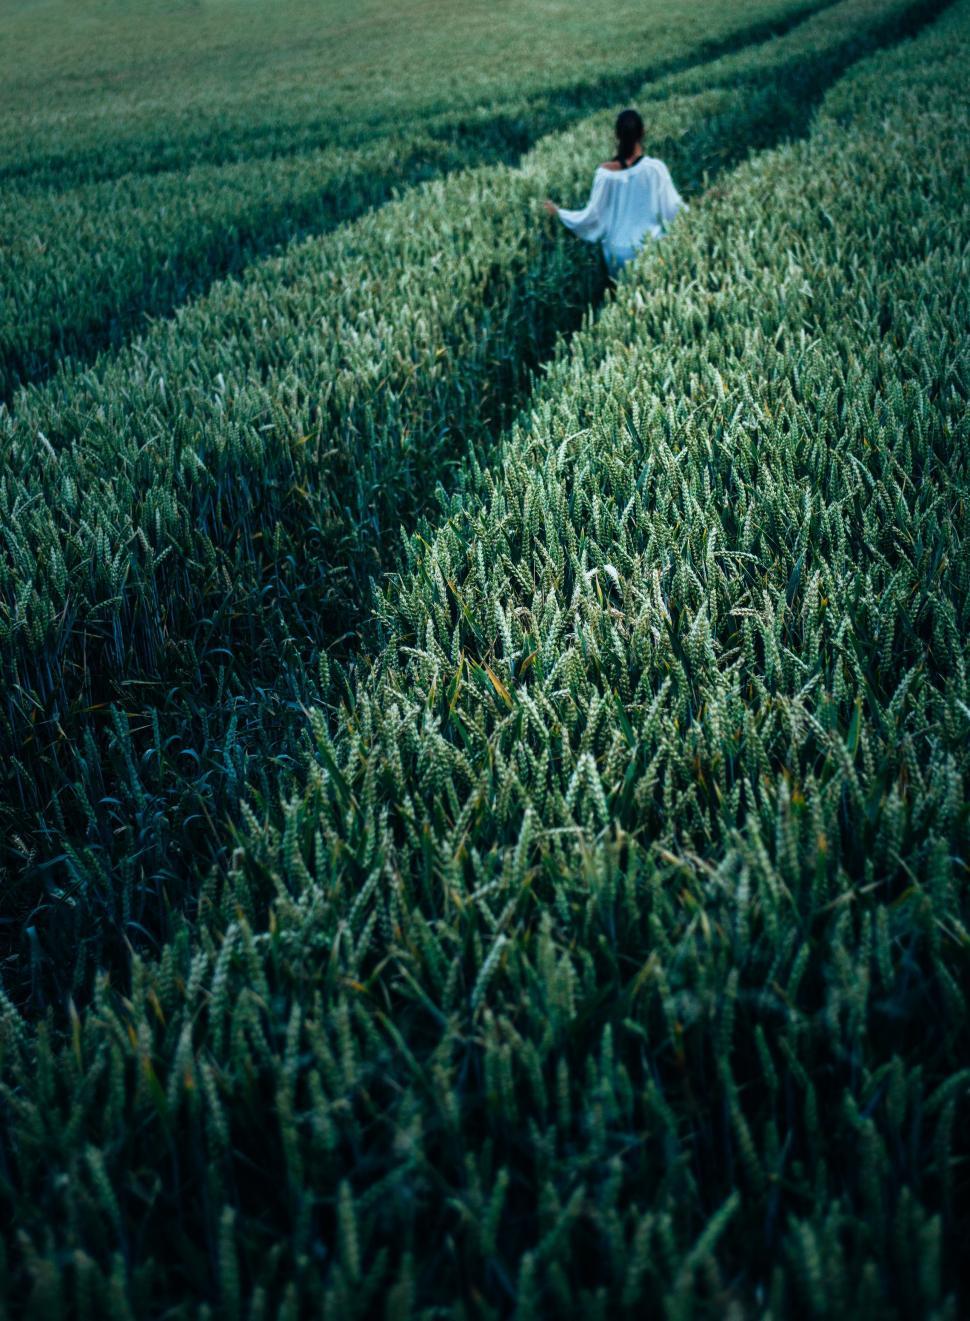 Free Image of Person Standing in a Field of Green Grass 